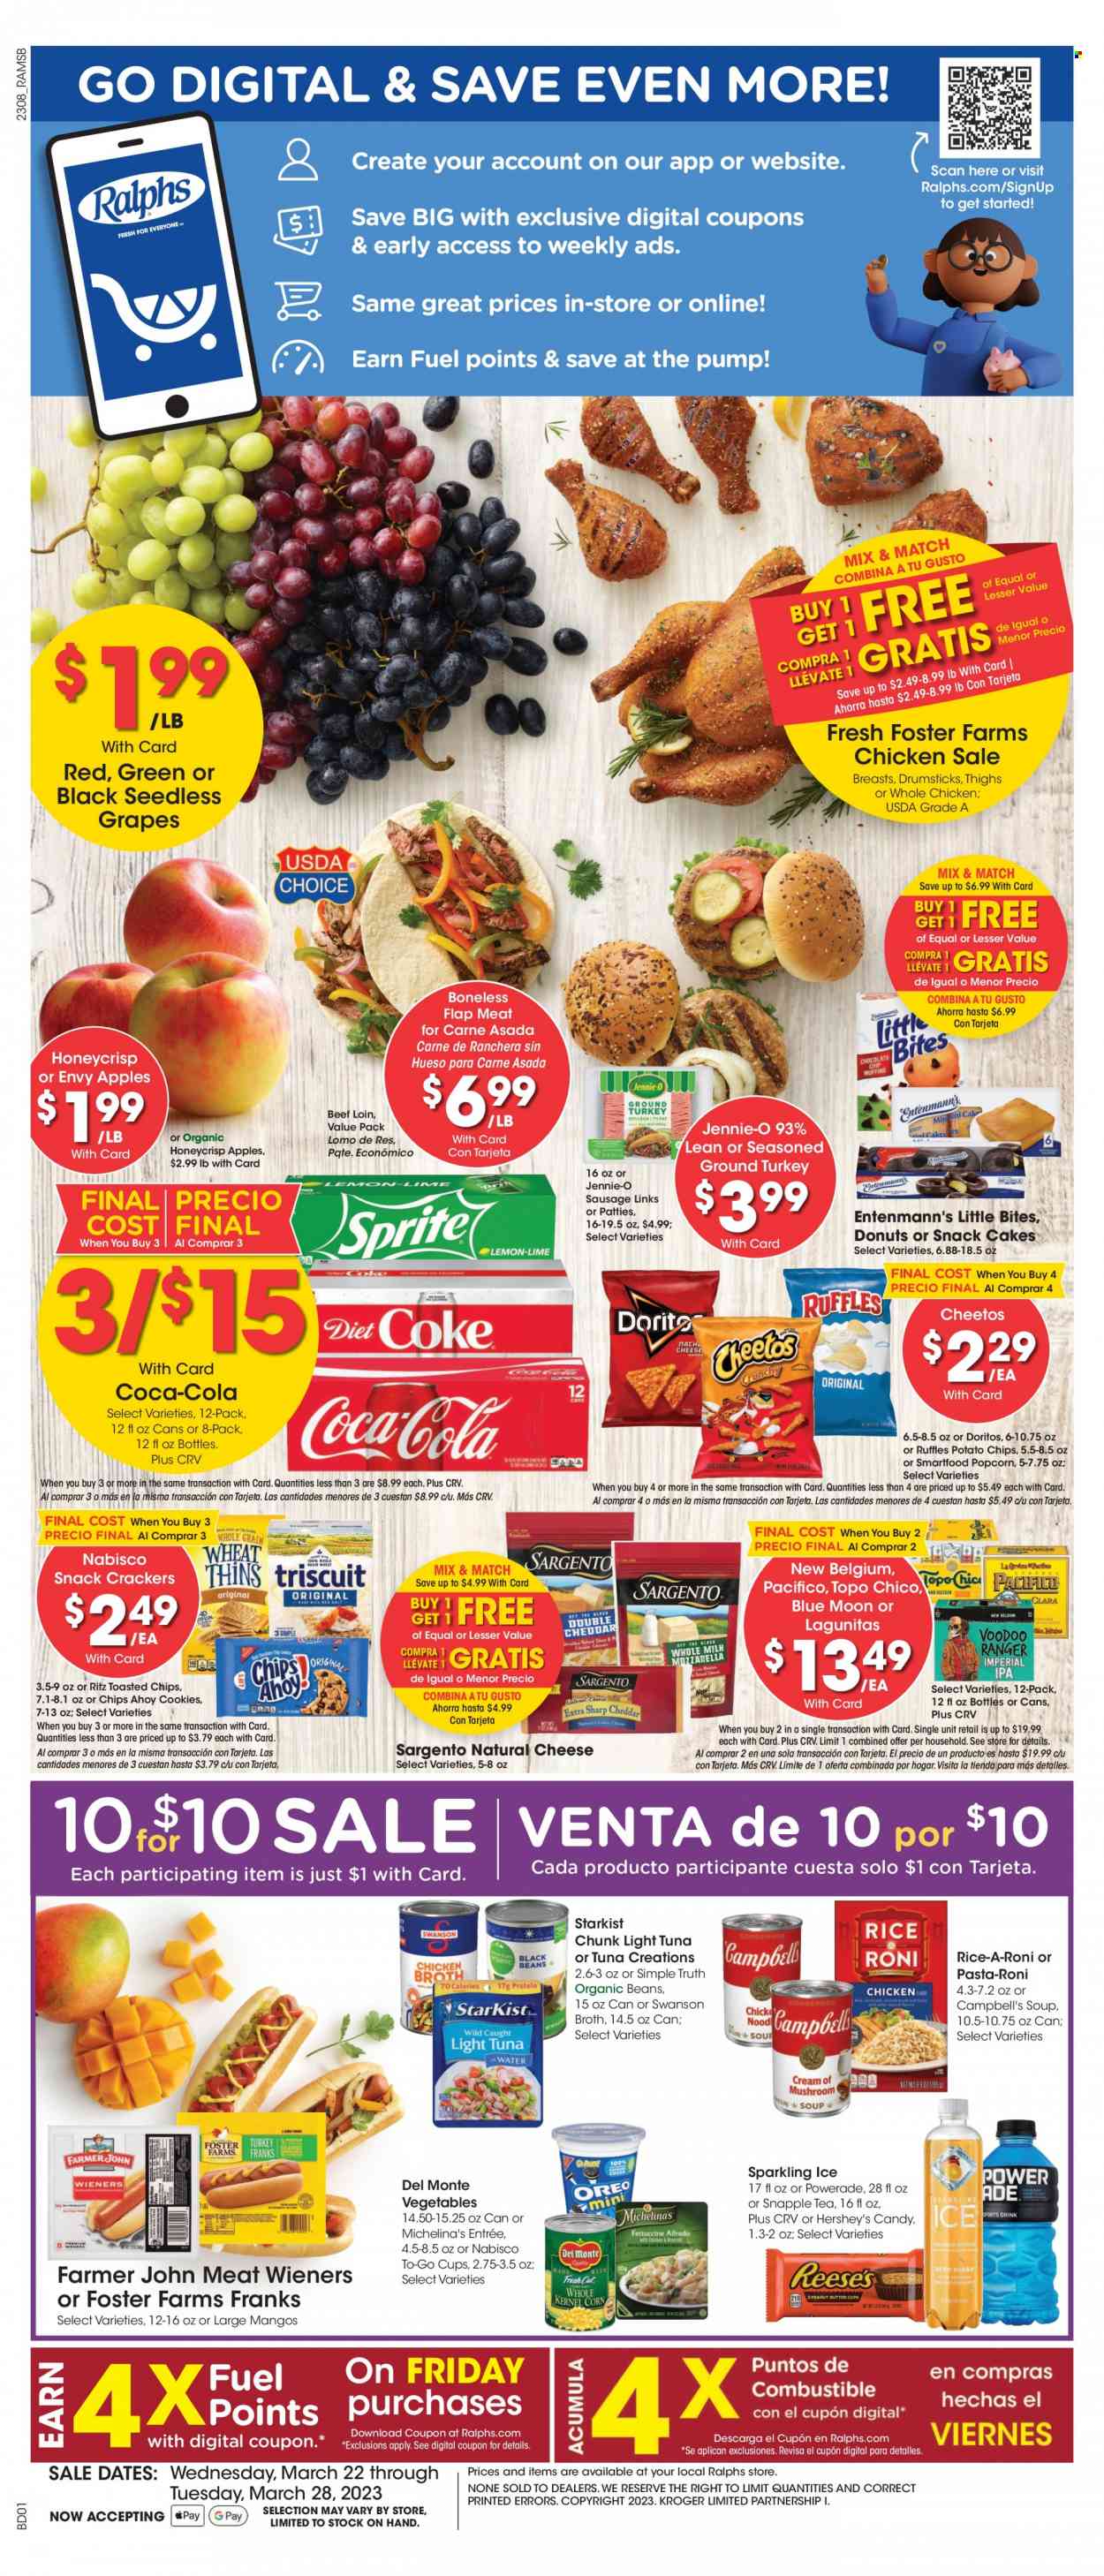 thumbnail - Ralphs Flyer - 03/22/2023 - 03/28/2023 - Sales products - cake, donut, Entenmann's, corn, apples, grapes, seedless grapes, tuna, StarKist, Campbell's, mushroom soup, soup, sausage, cheese, Sargento, Oreo, Reese's, Hershey's, cookies, crackers, Little Bites, RITZ, Doritos, potato chips, Cheetos, chips, Smartfood, Thins, popcorn, Ruffles, chicken broth, broth, light tuna, Del Monte, rice, Coca-Cola, Sprite, Powerade, Diet Coke, Snapple, Coke, water, tea, beer, IPA, ground turkey, whole chicken, cup, Blue Moon. Page 1.